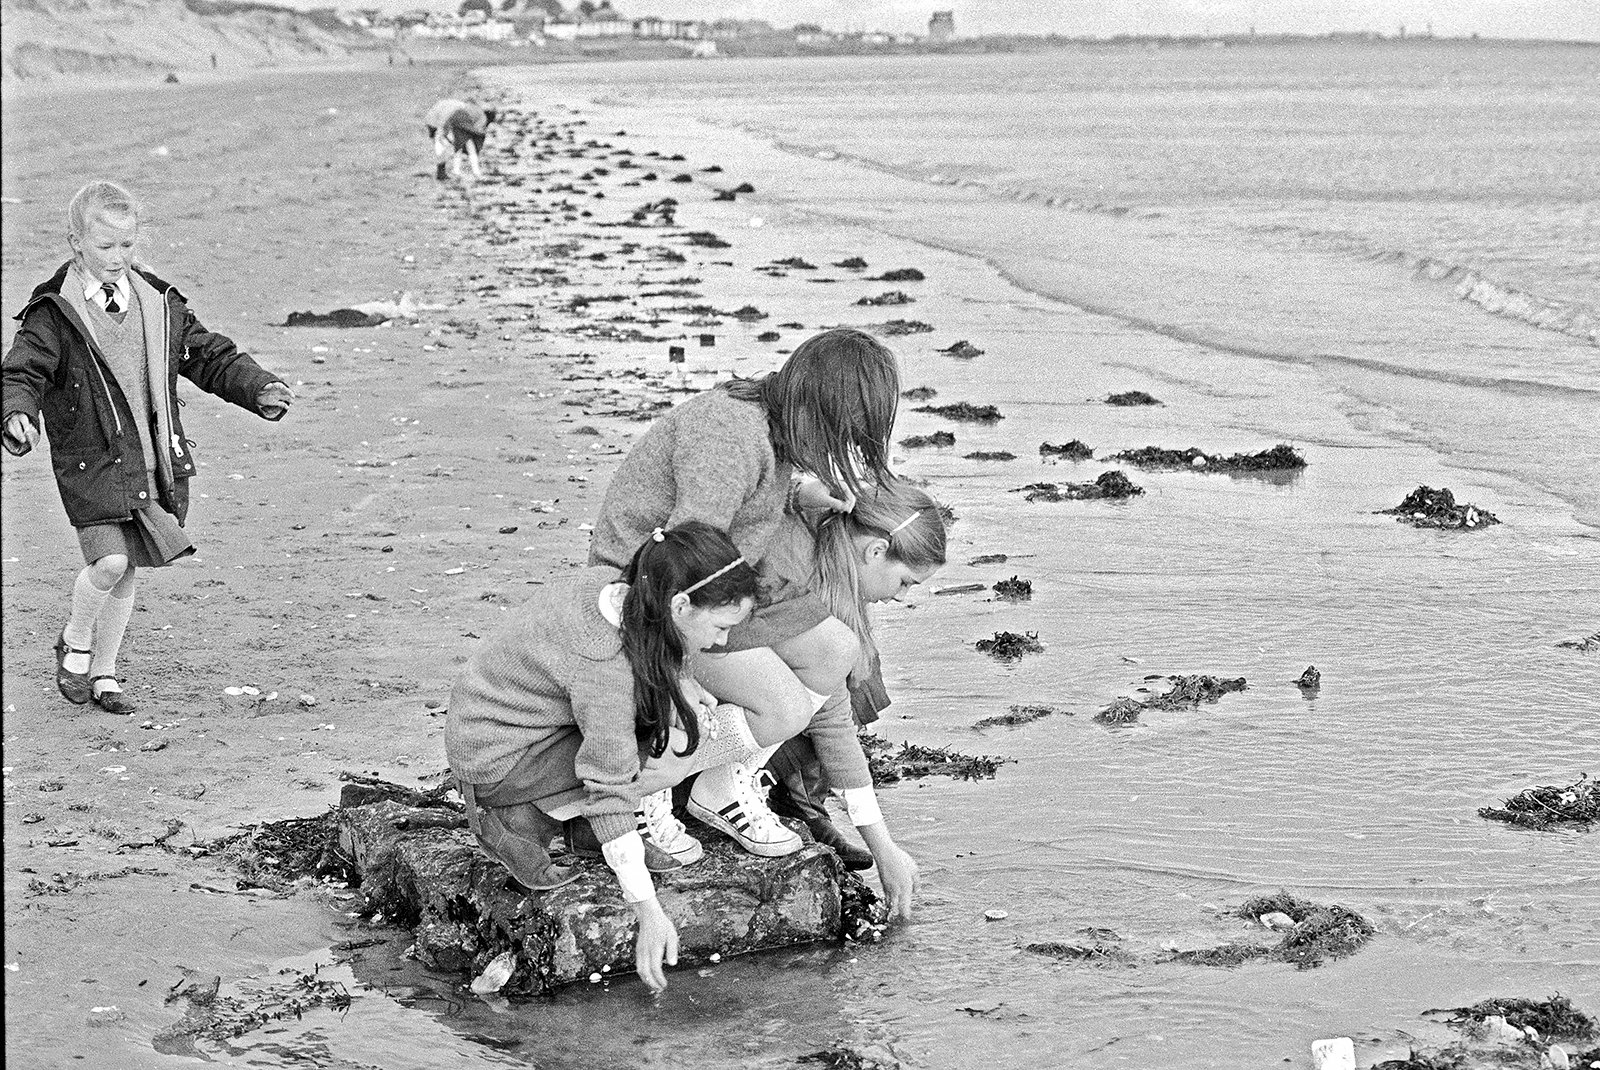 Pictures made by Kim’s teacher Mr. O’Connell during lunch-time trips to the nearby beach, Portmarnock, Dublin, 1982–1983.